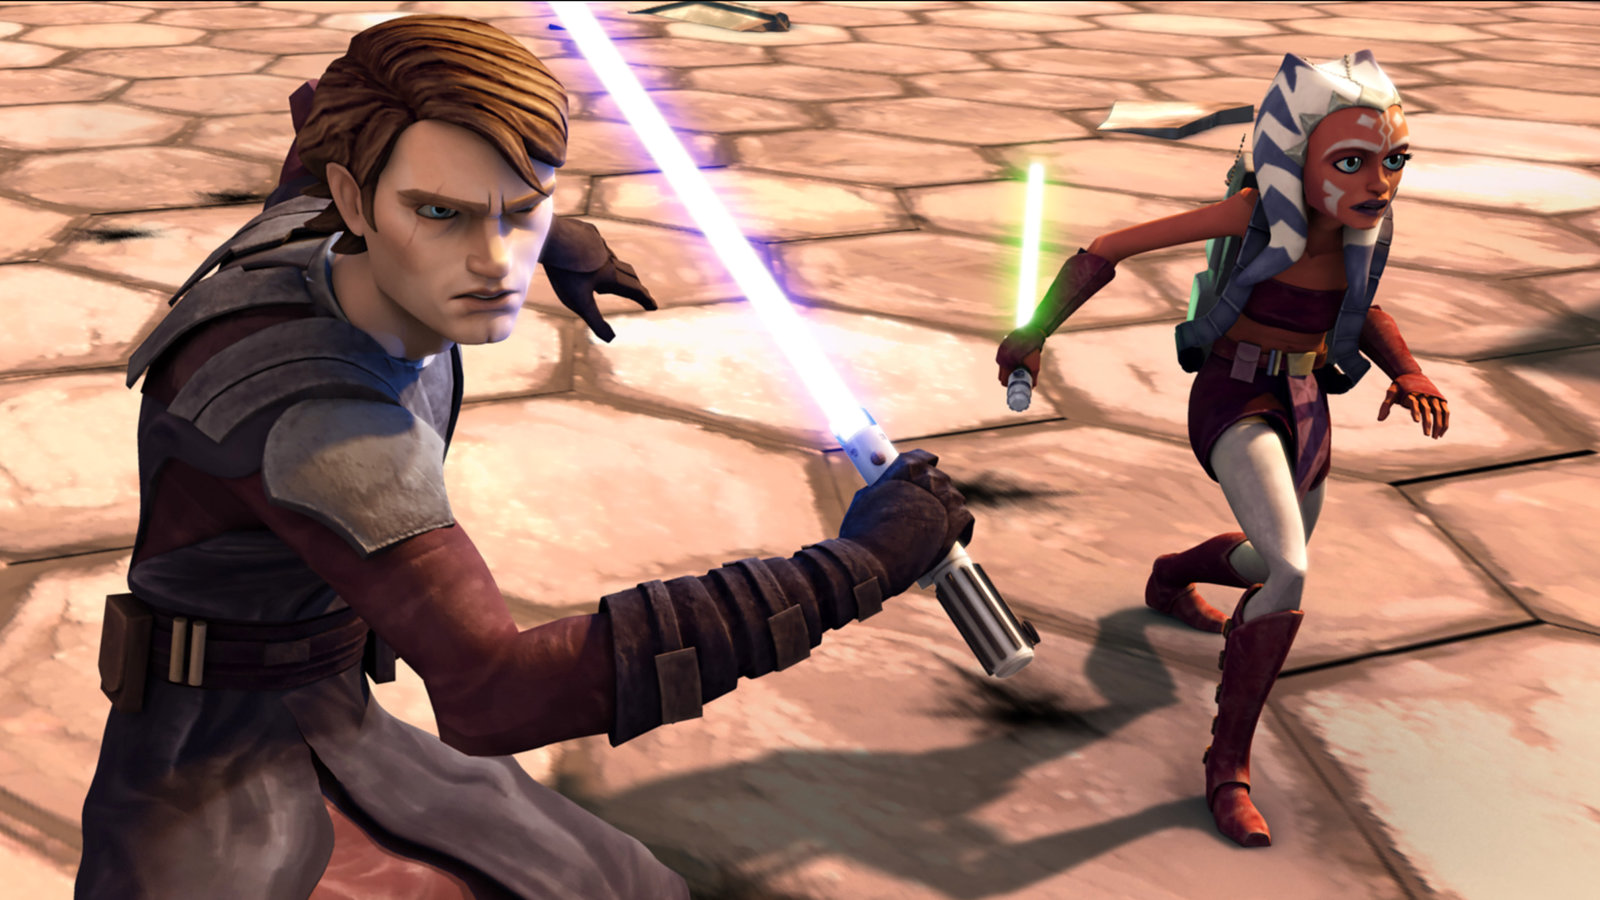 Star Wars: The Clone Wars – There Are Reportedly Enough Untold Story Arcs To Produce Another 40 Episodes Of The Show